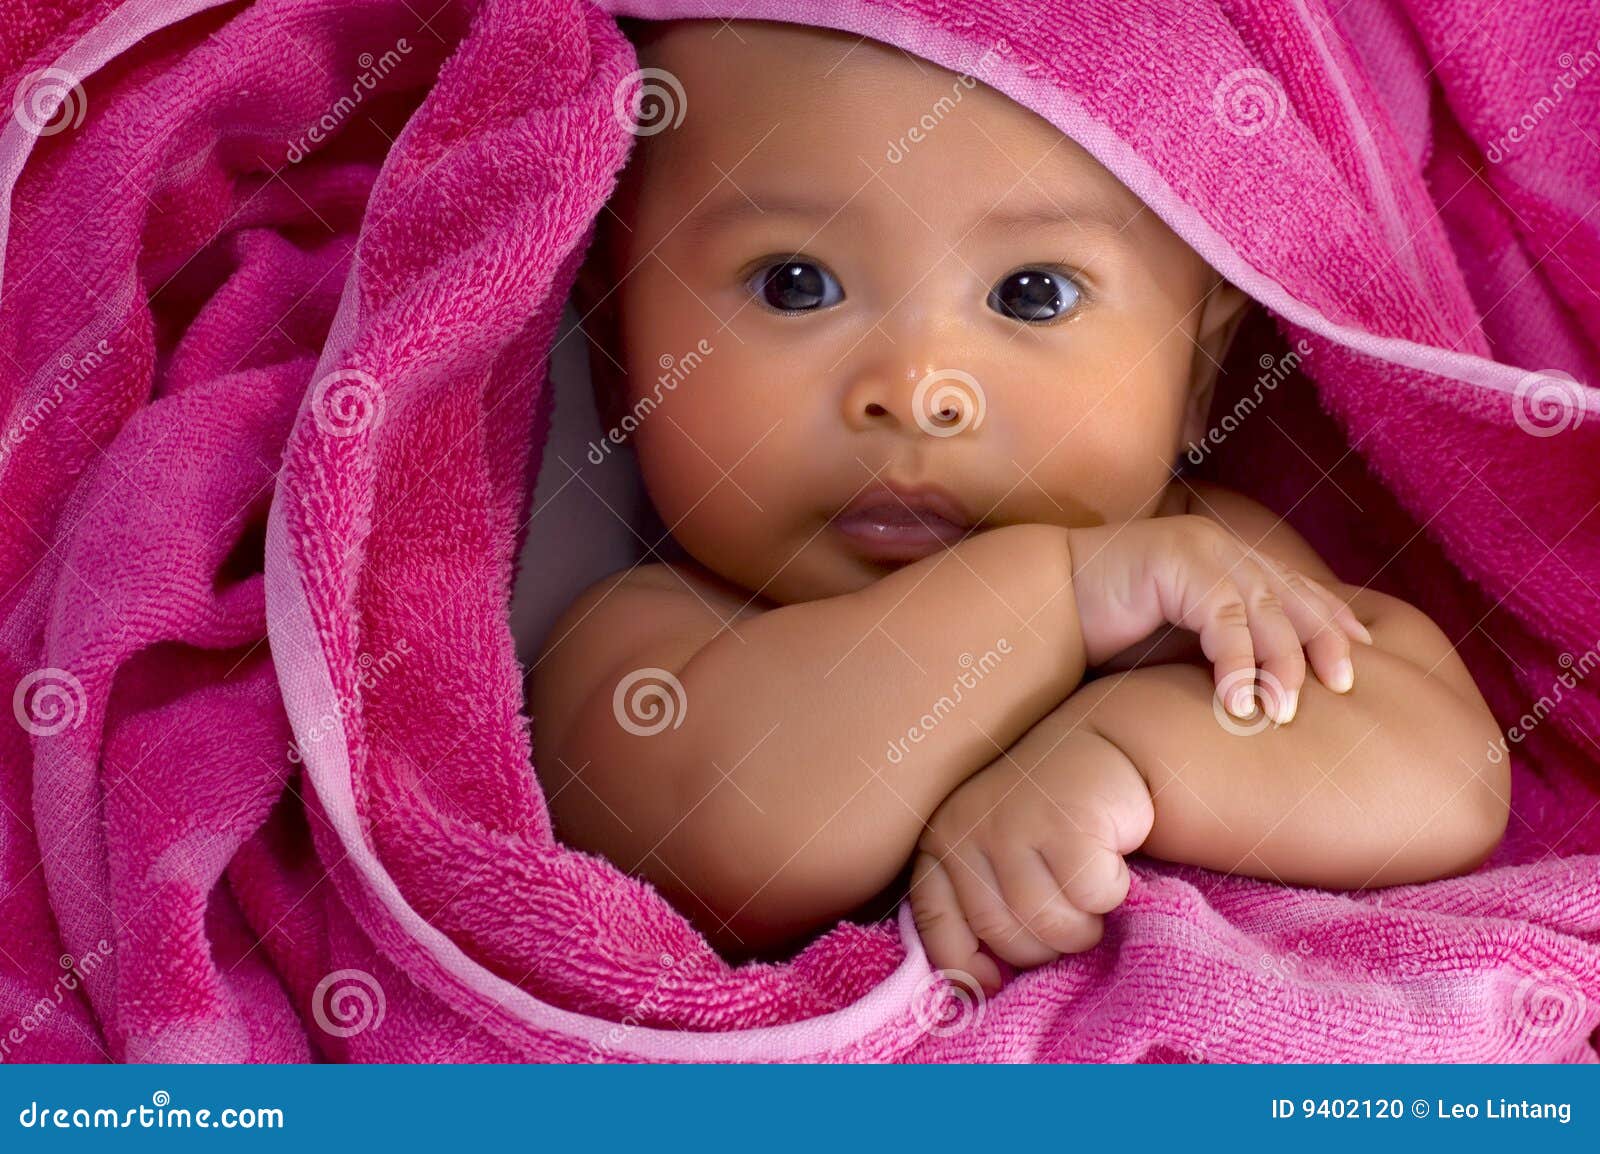 baby in the towel